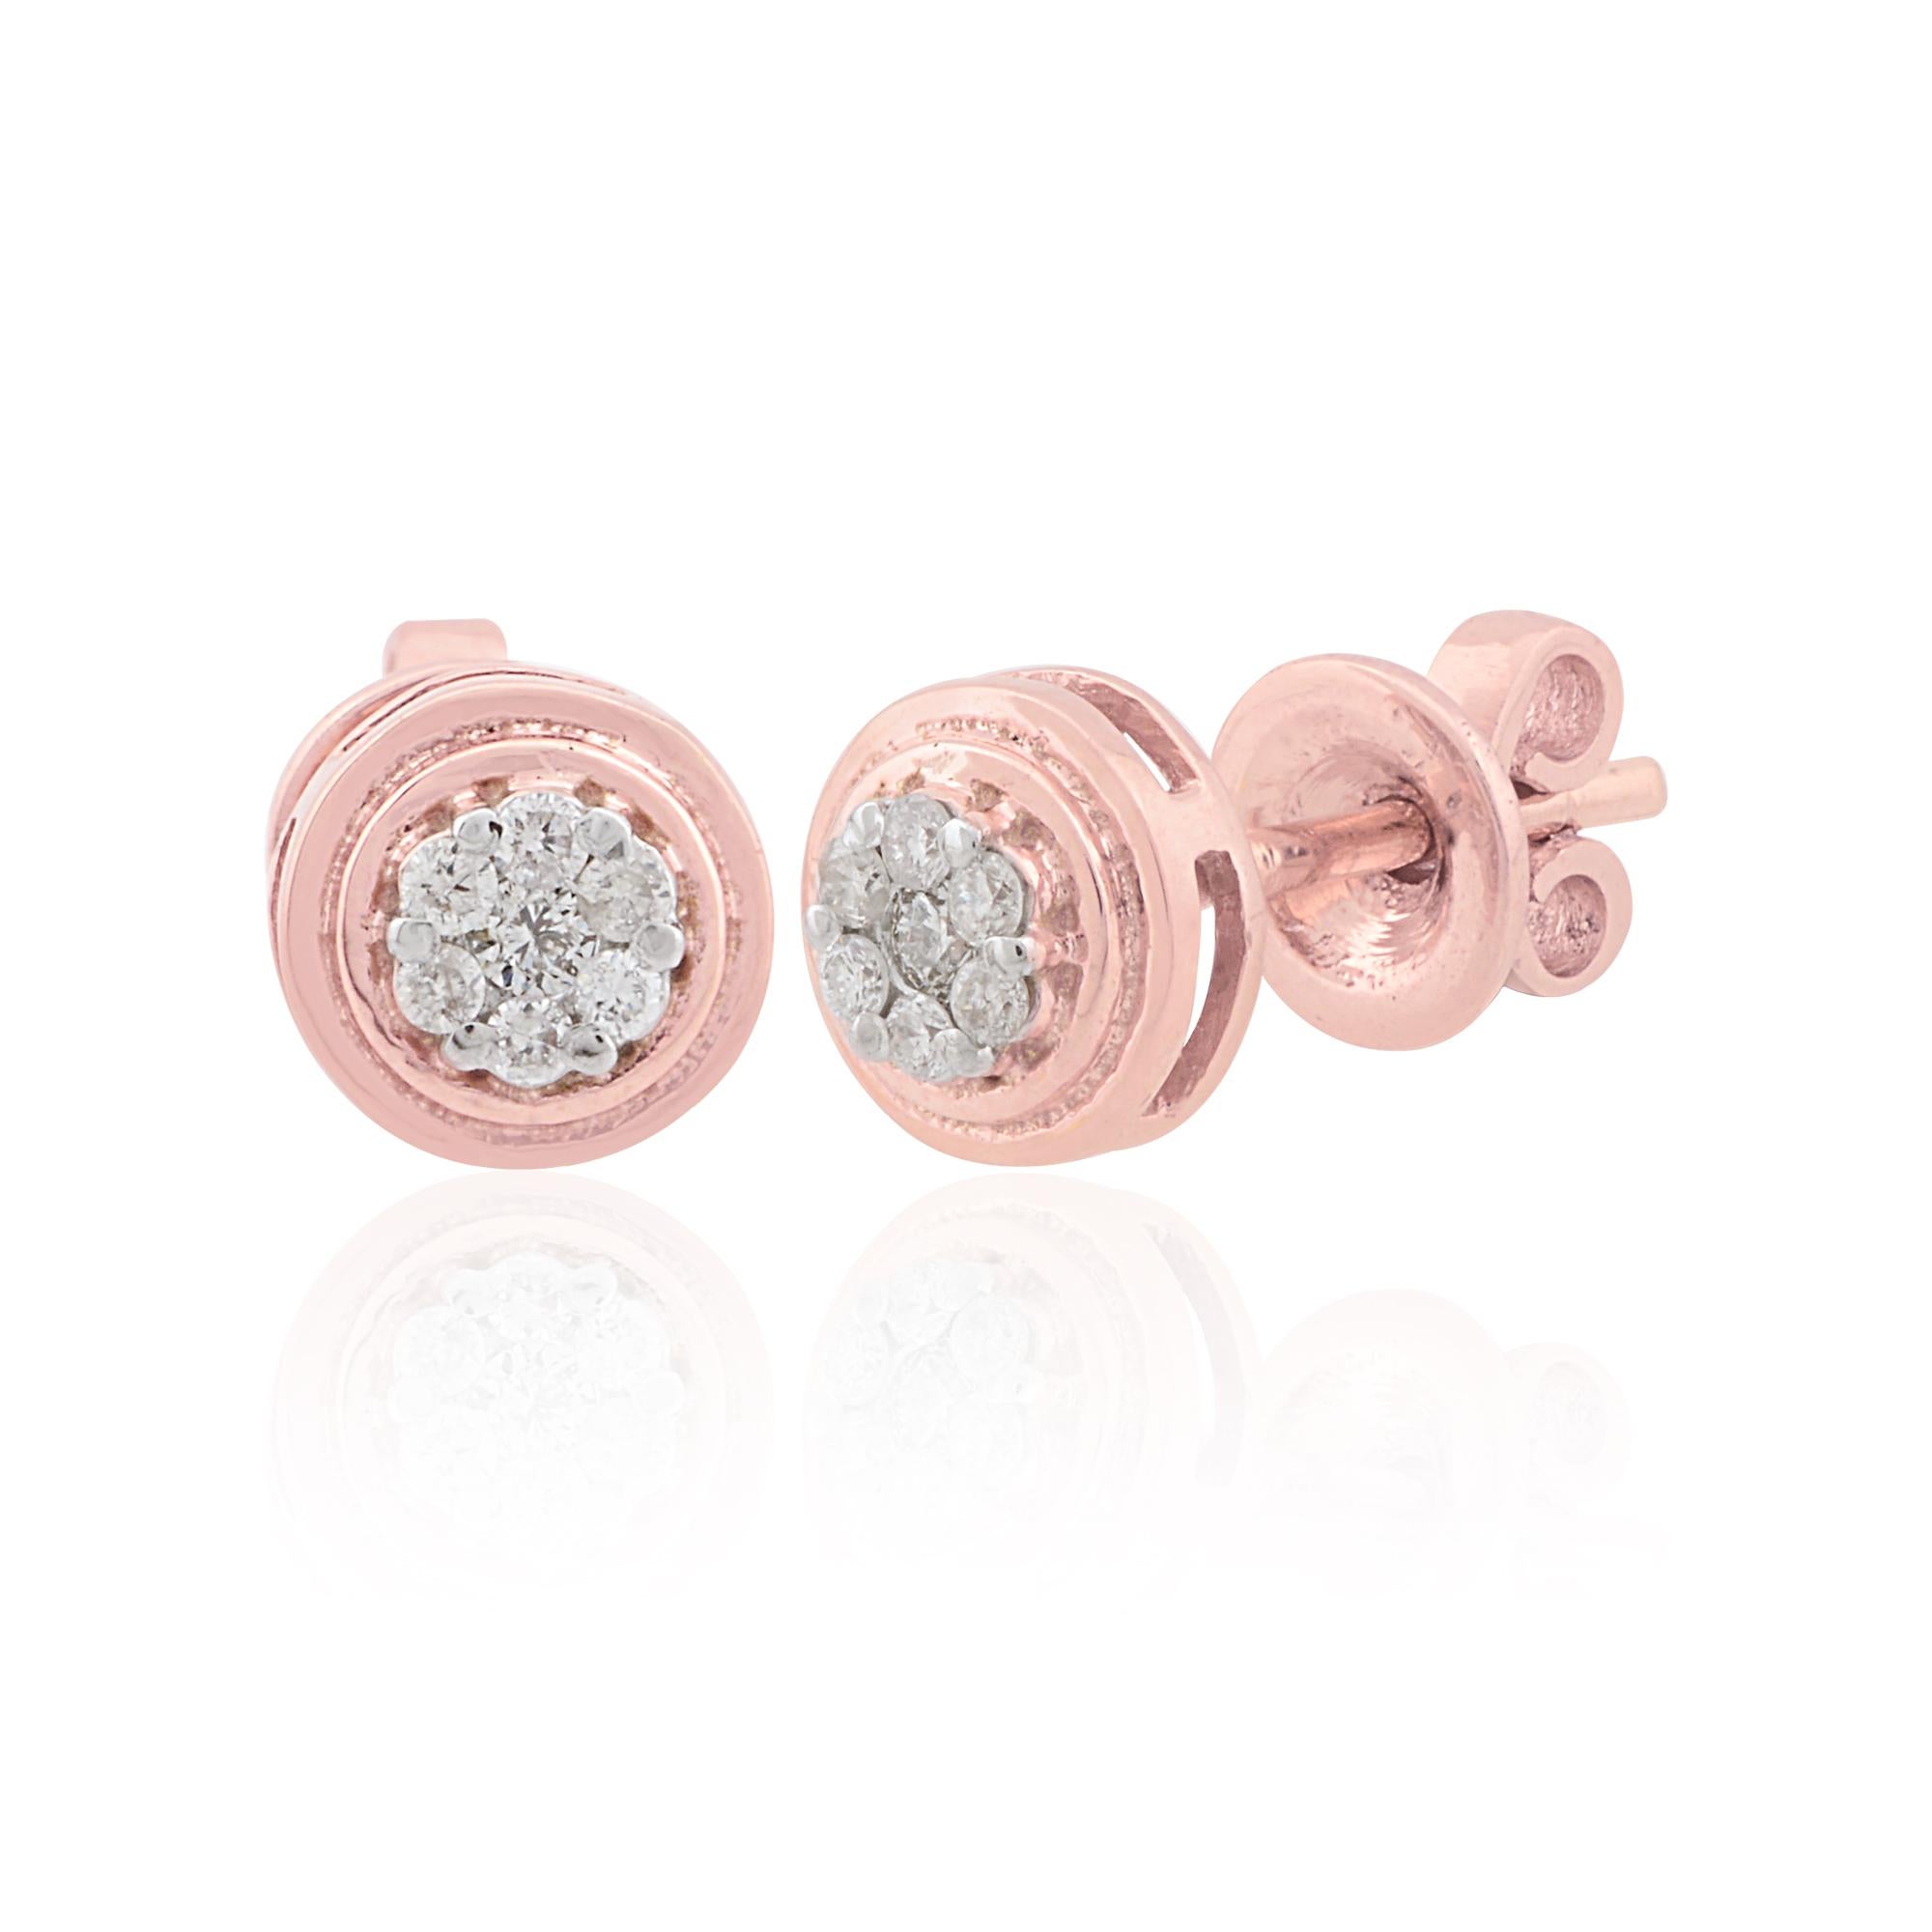 Each earring showcases a mesmerizing round-cut diamond, totaling 0.12 carats. These diamonds boast SI clarity and HI color grades, ensuring exceptional quality and brilliance. The classic stud design allows the diamonds to take center stage,